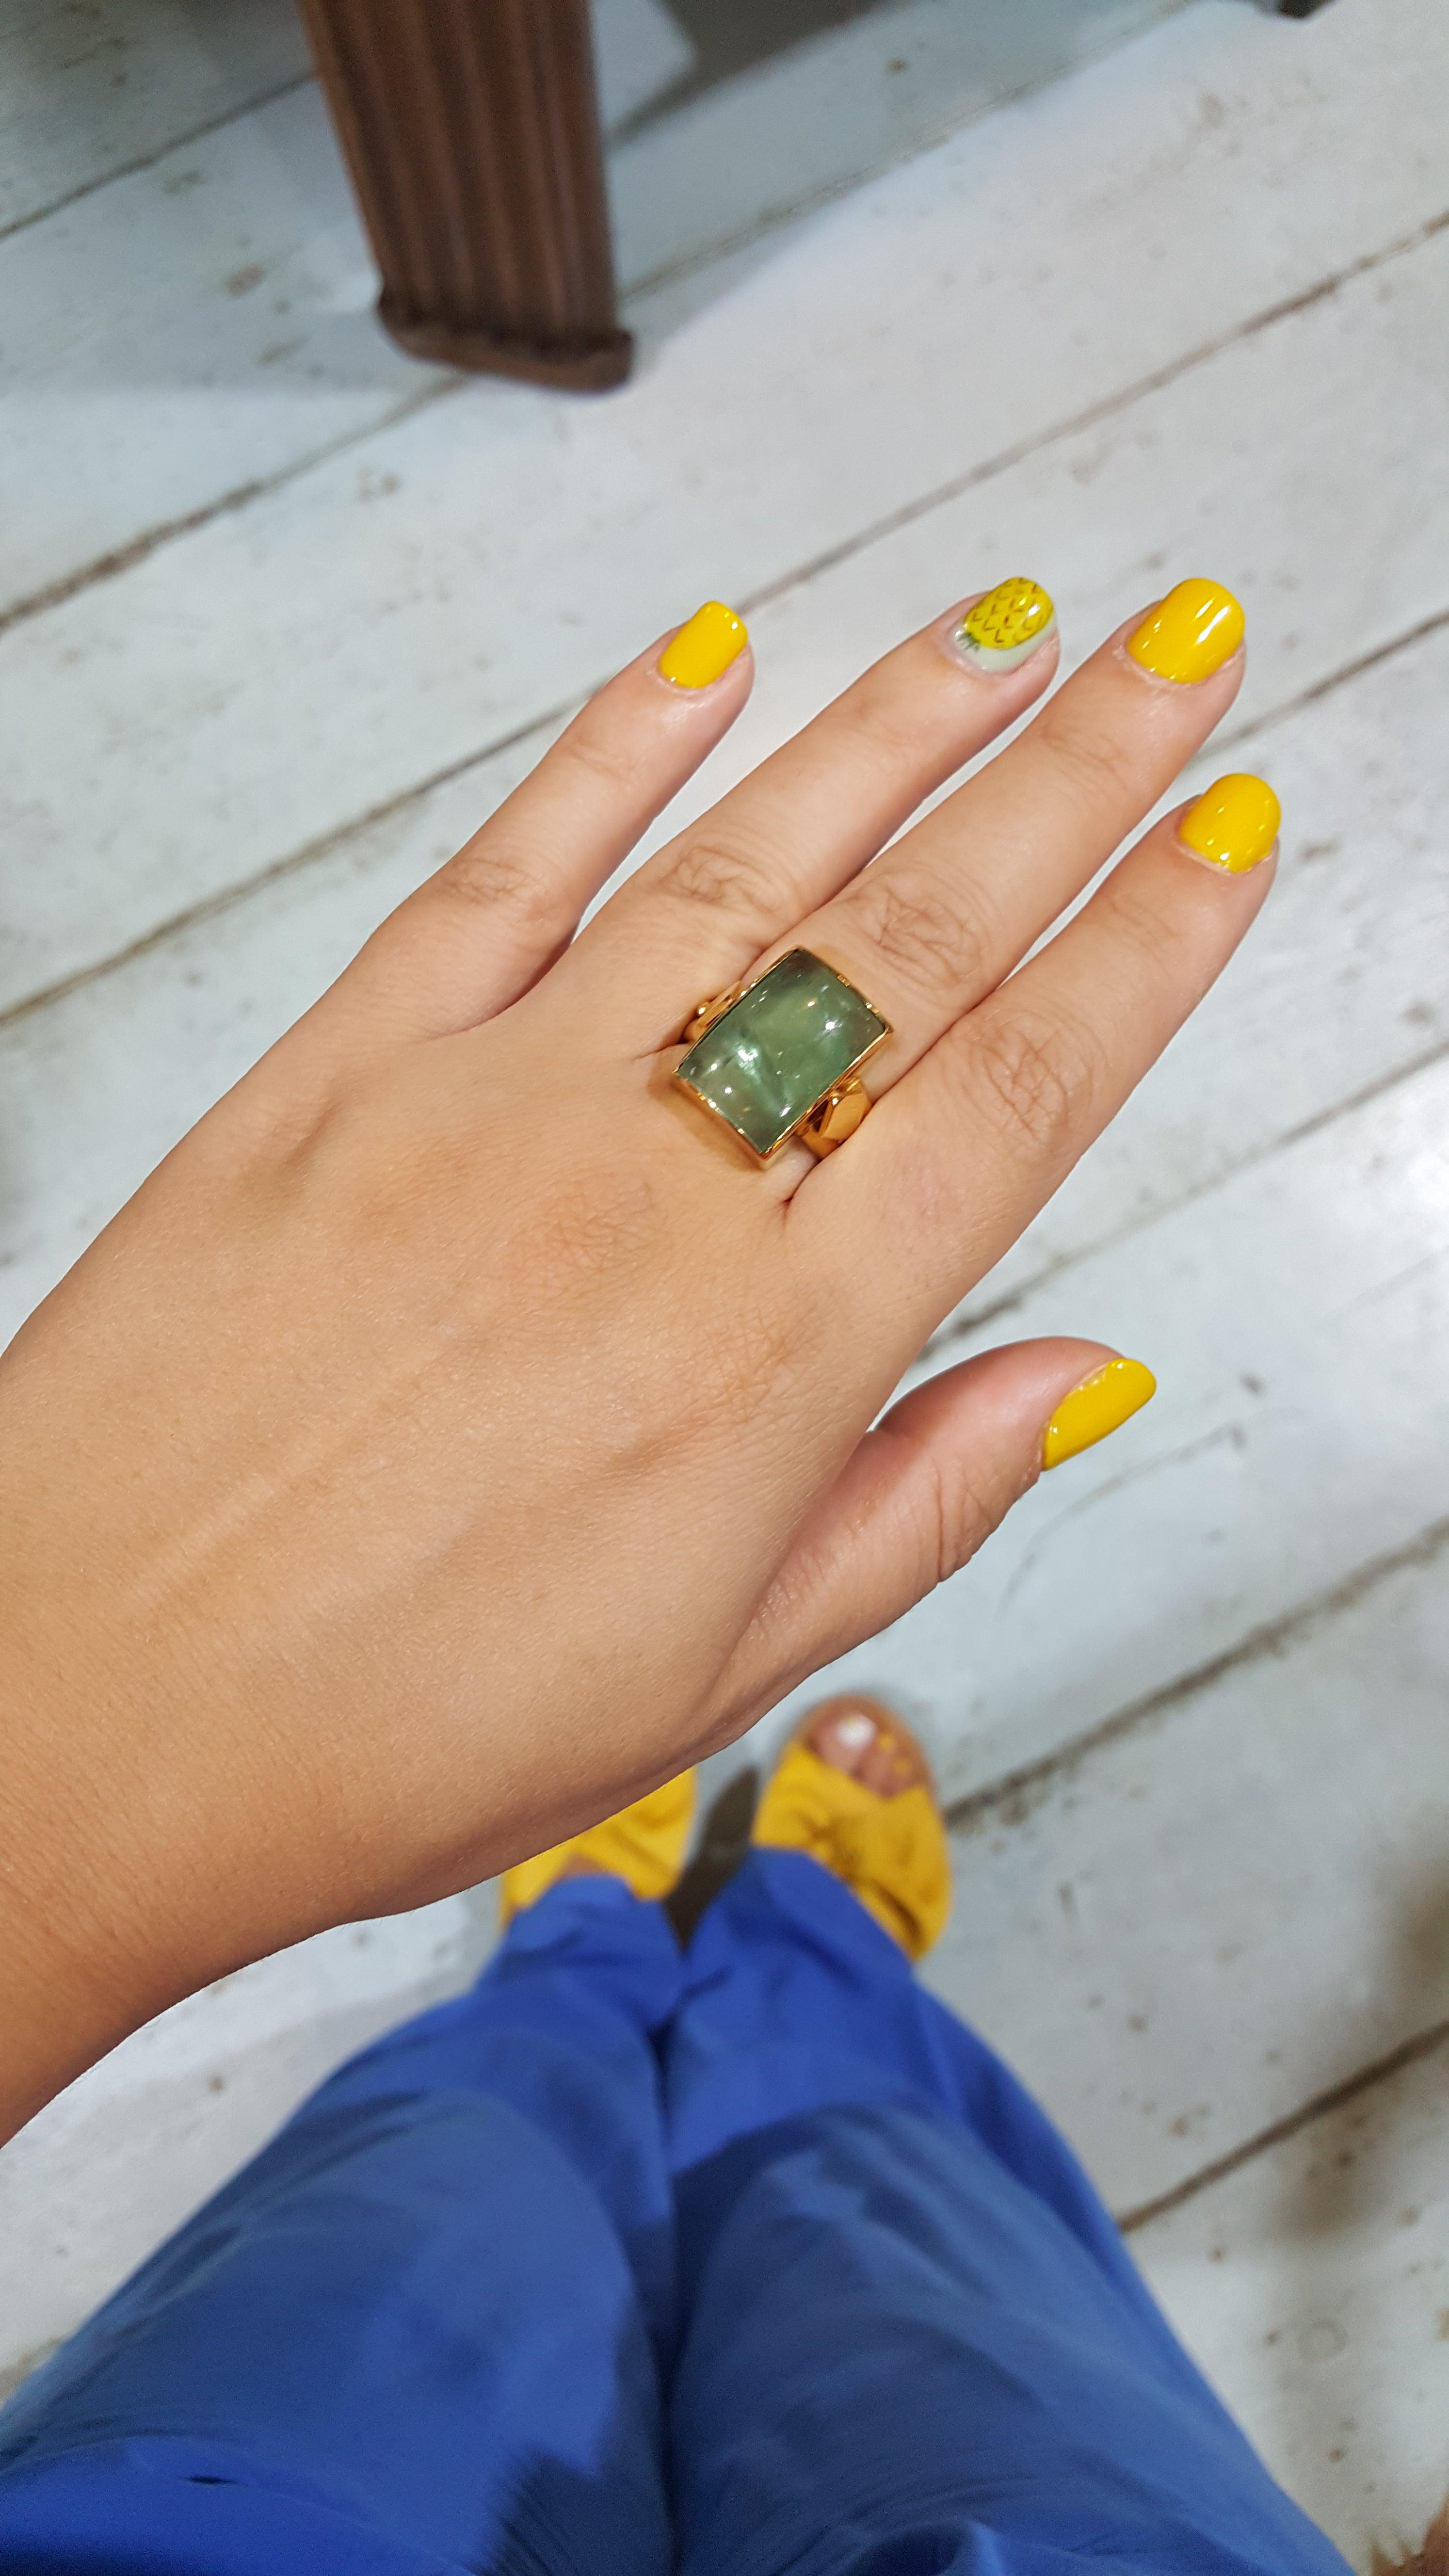 Ring in 18k Gold with a Fluorite Cabochon (B-94)